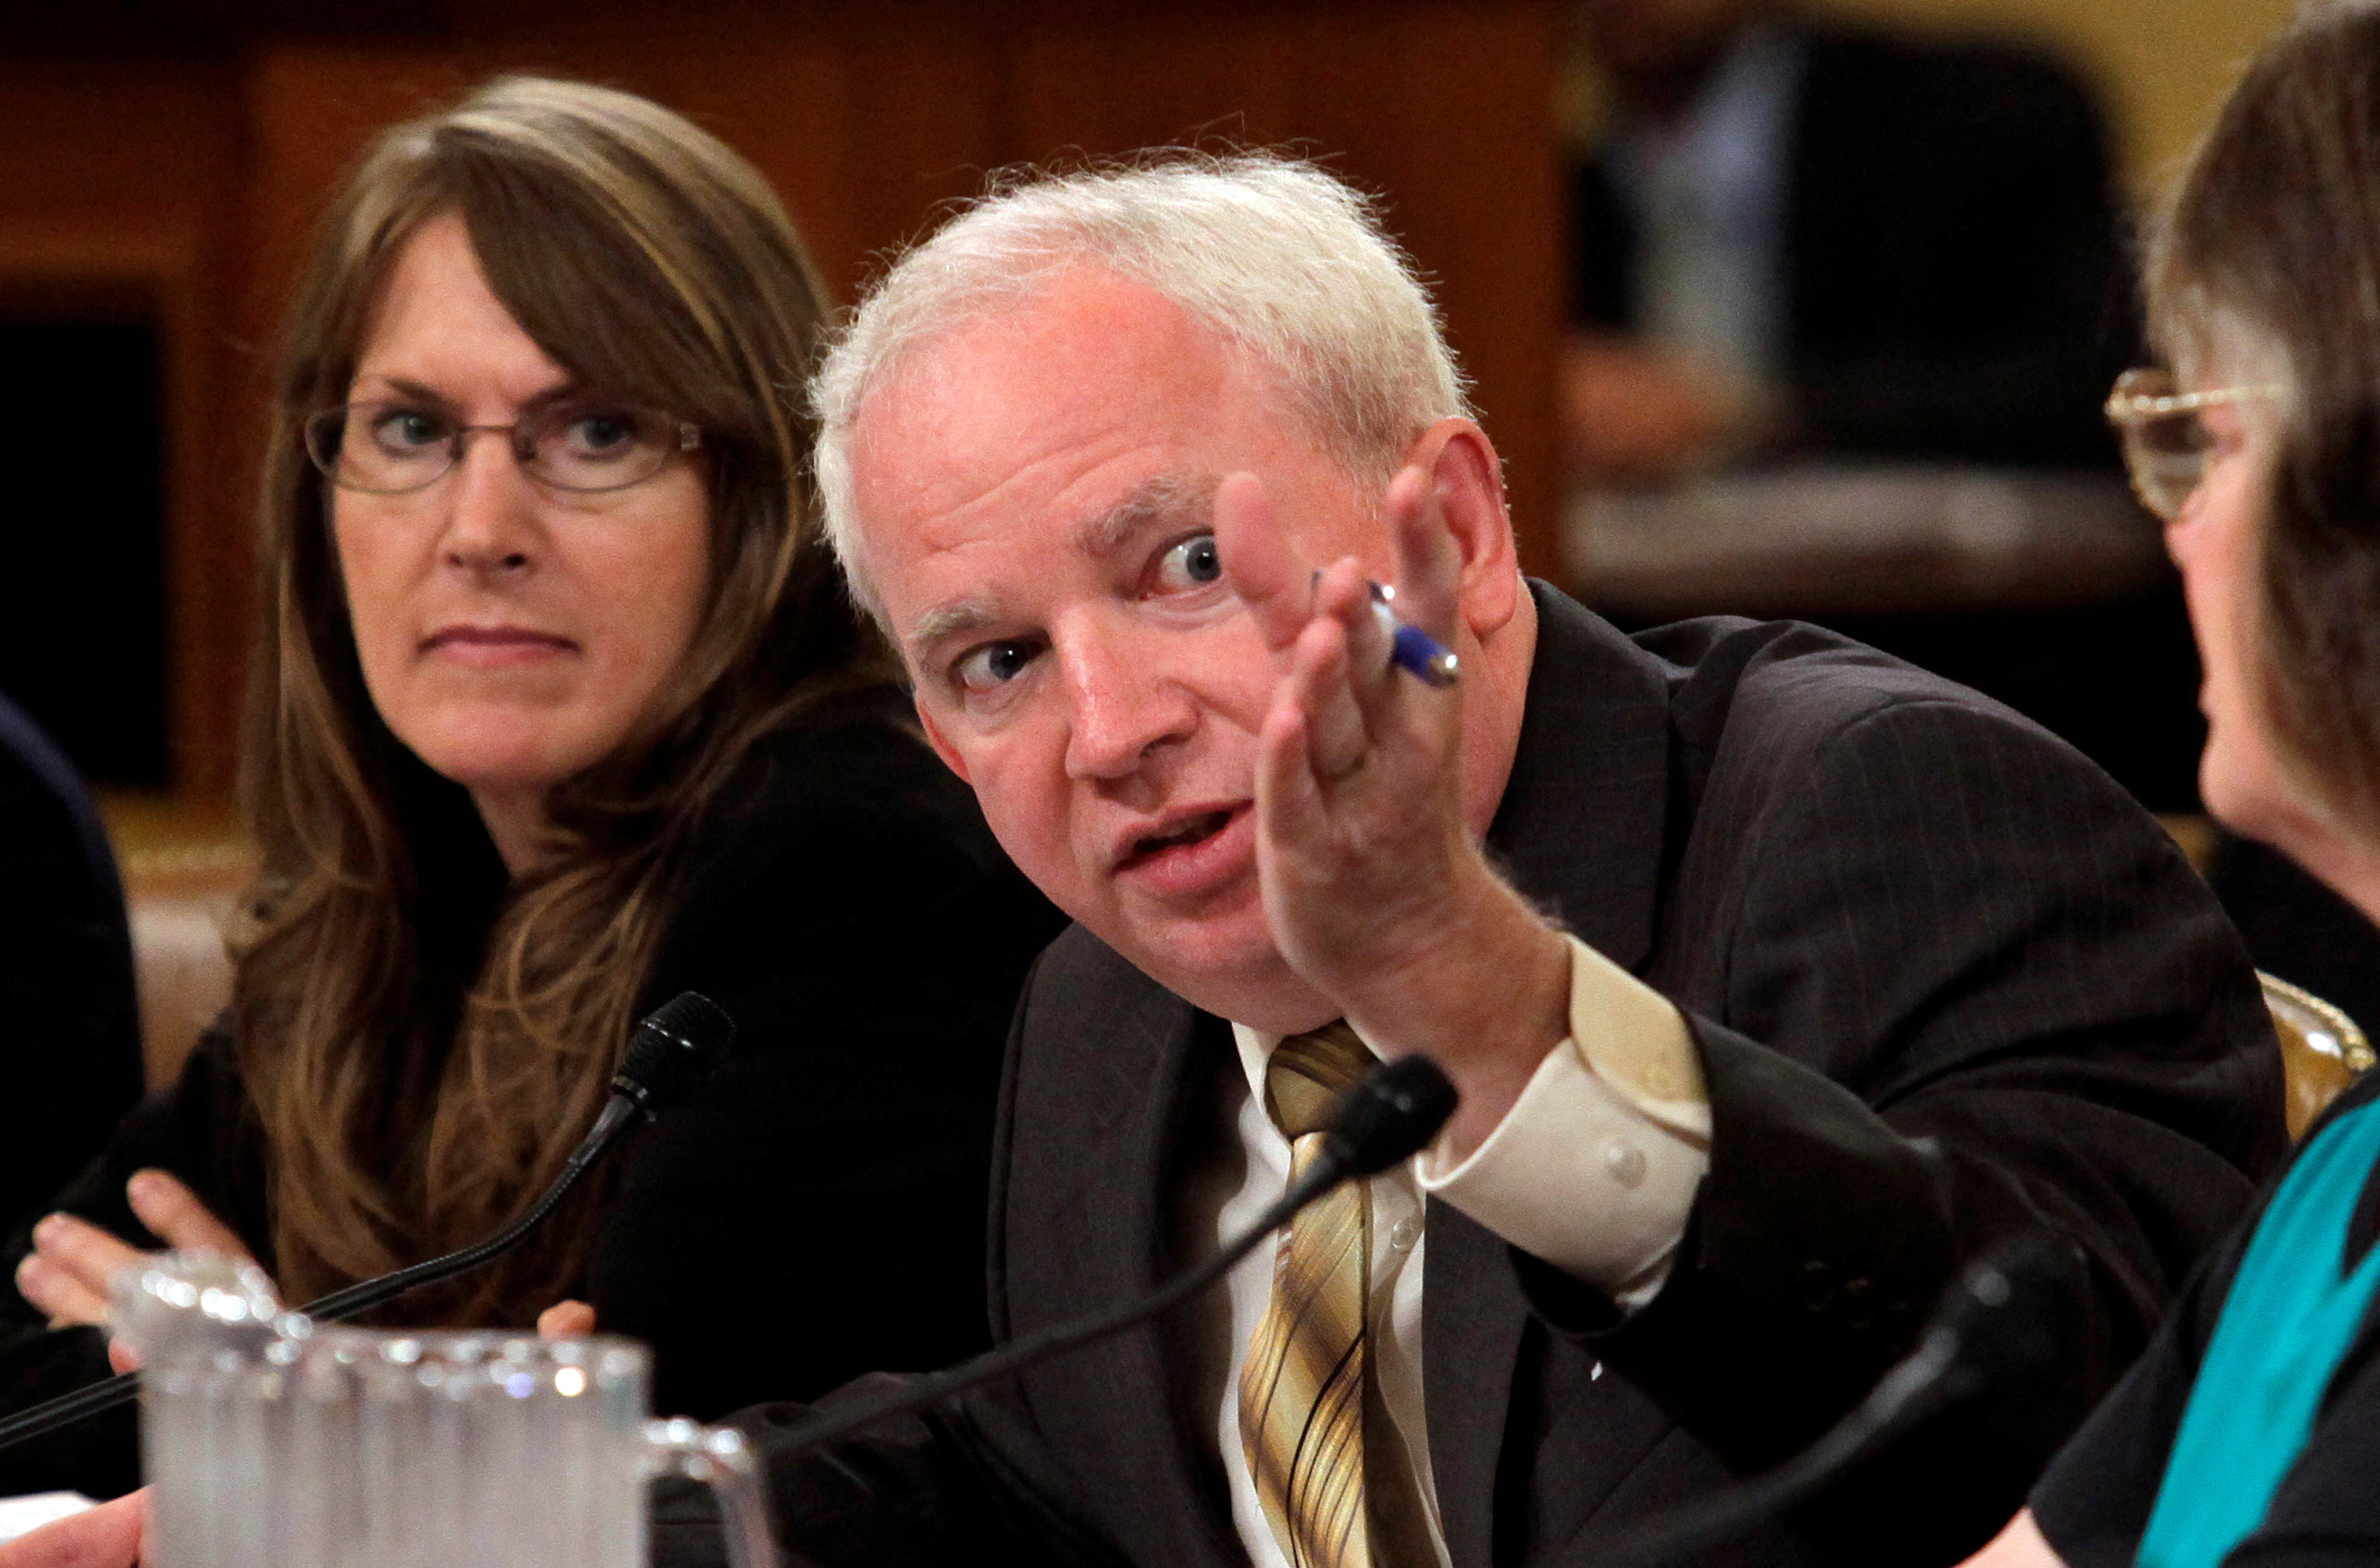 John Eastman testifies before the House Ways and Means Committee hearing on Organizations Targeted by IRS for Their Personal Beliefs on Capitol Hill in Washington